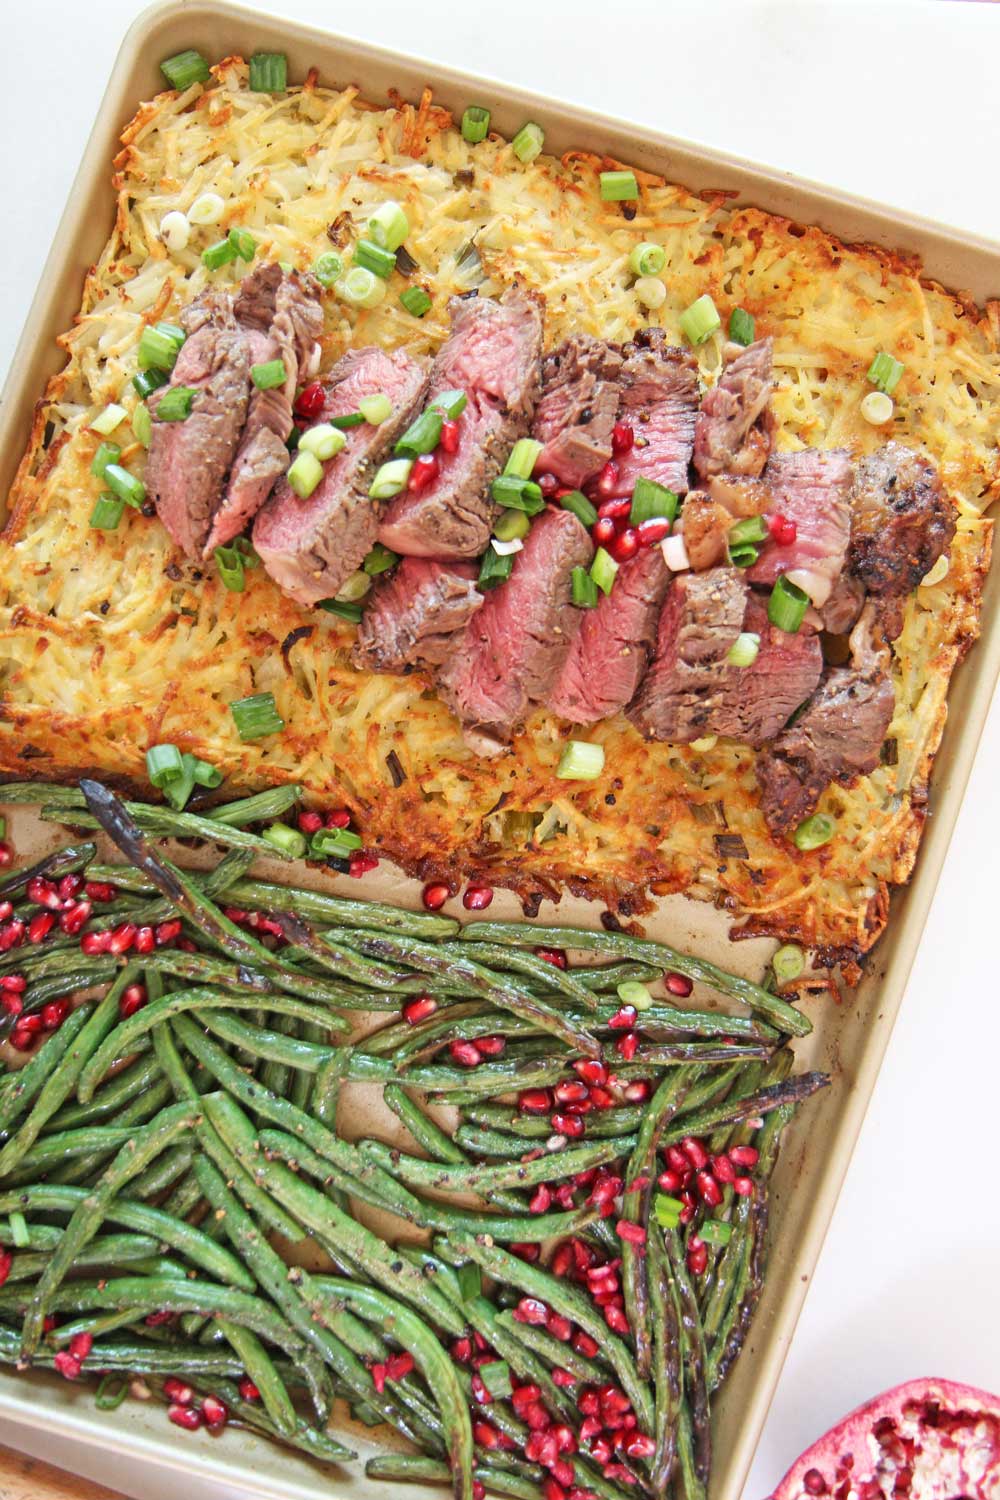 Full Holiday Dinner on a Sheet Pan. Steak and Potatoes for Christmas or Hanukkah. This is a full holiday dinner on a sheet pan. Happy Holidays! www.ChopHappy.com #Christmasdinner #sheetpandinner